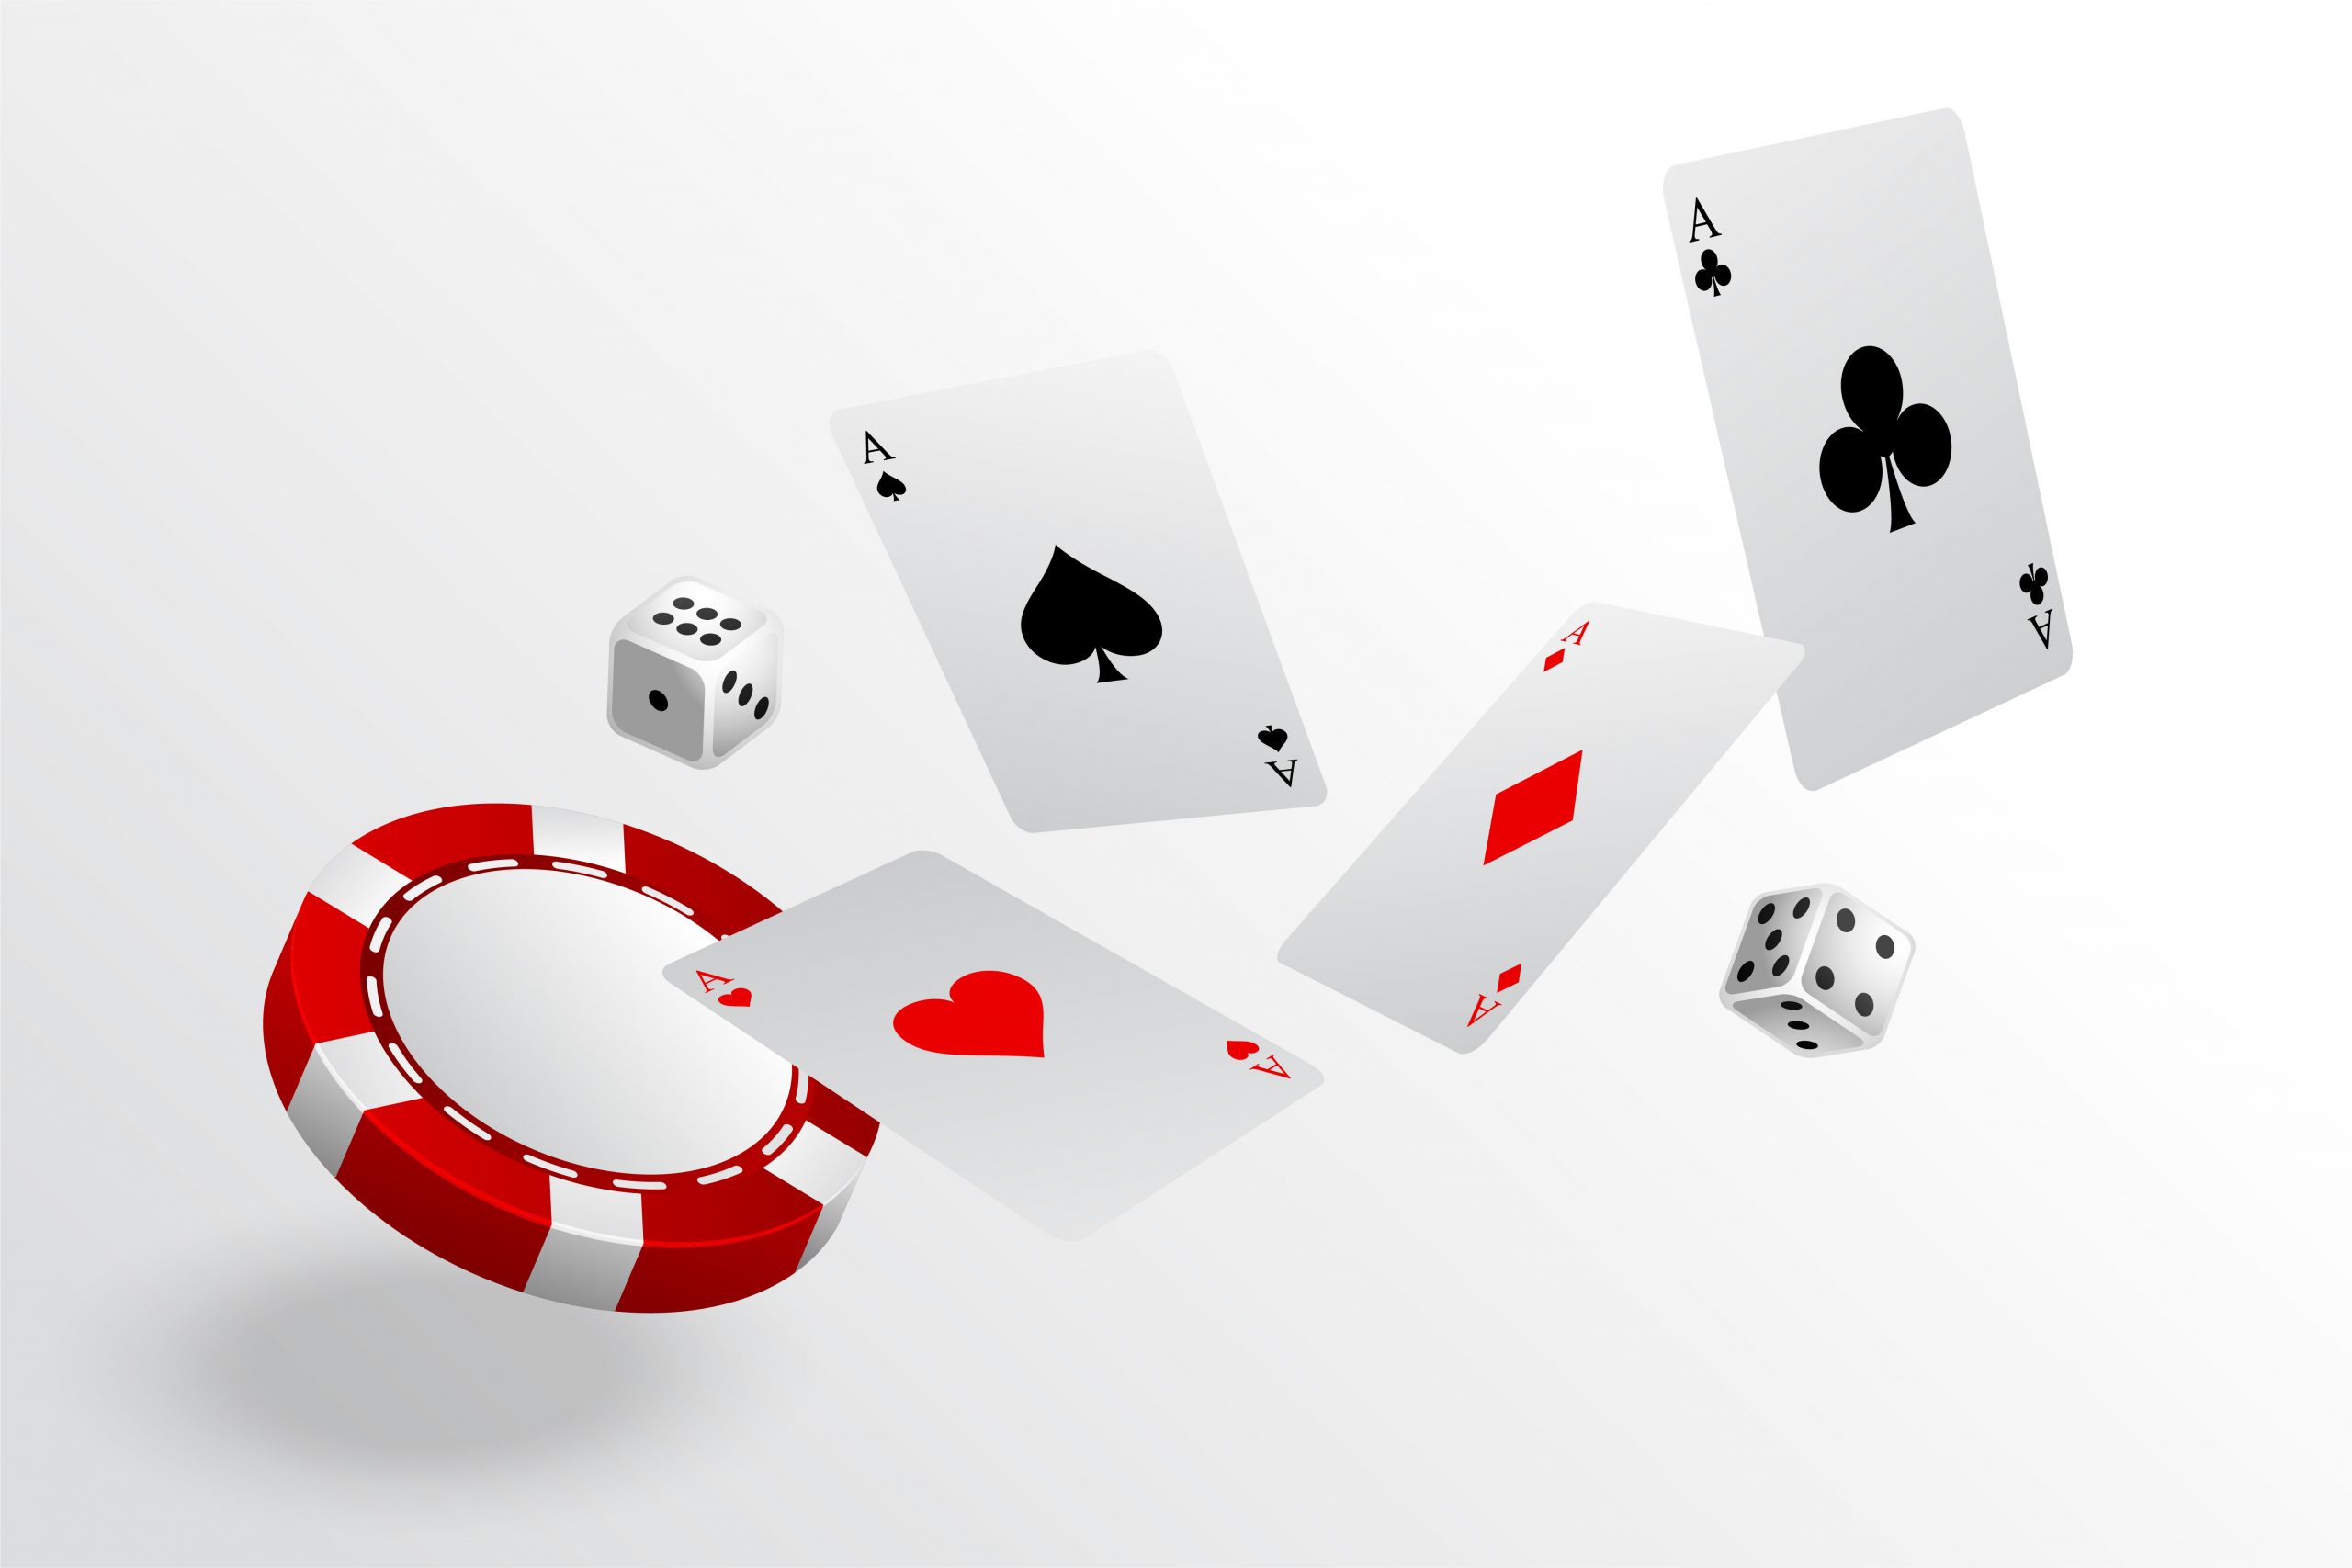 High stakes poker: how to play and win